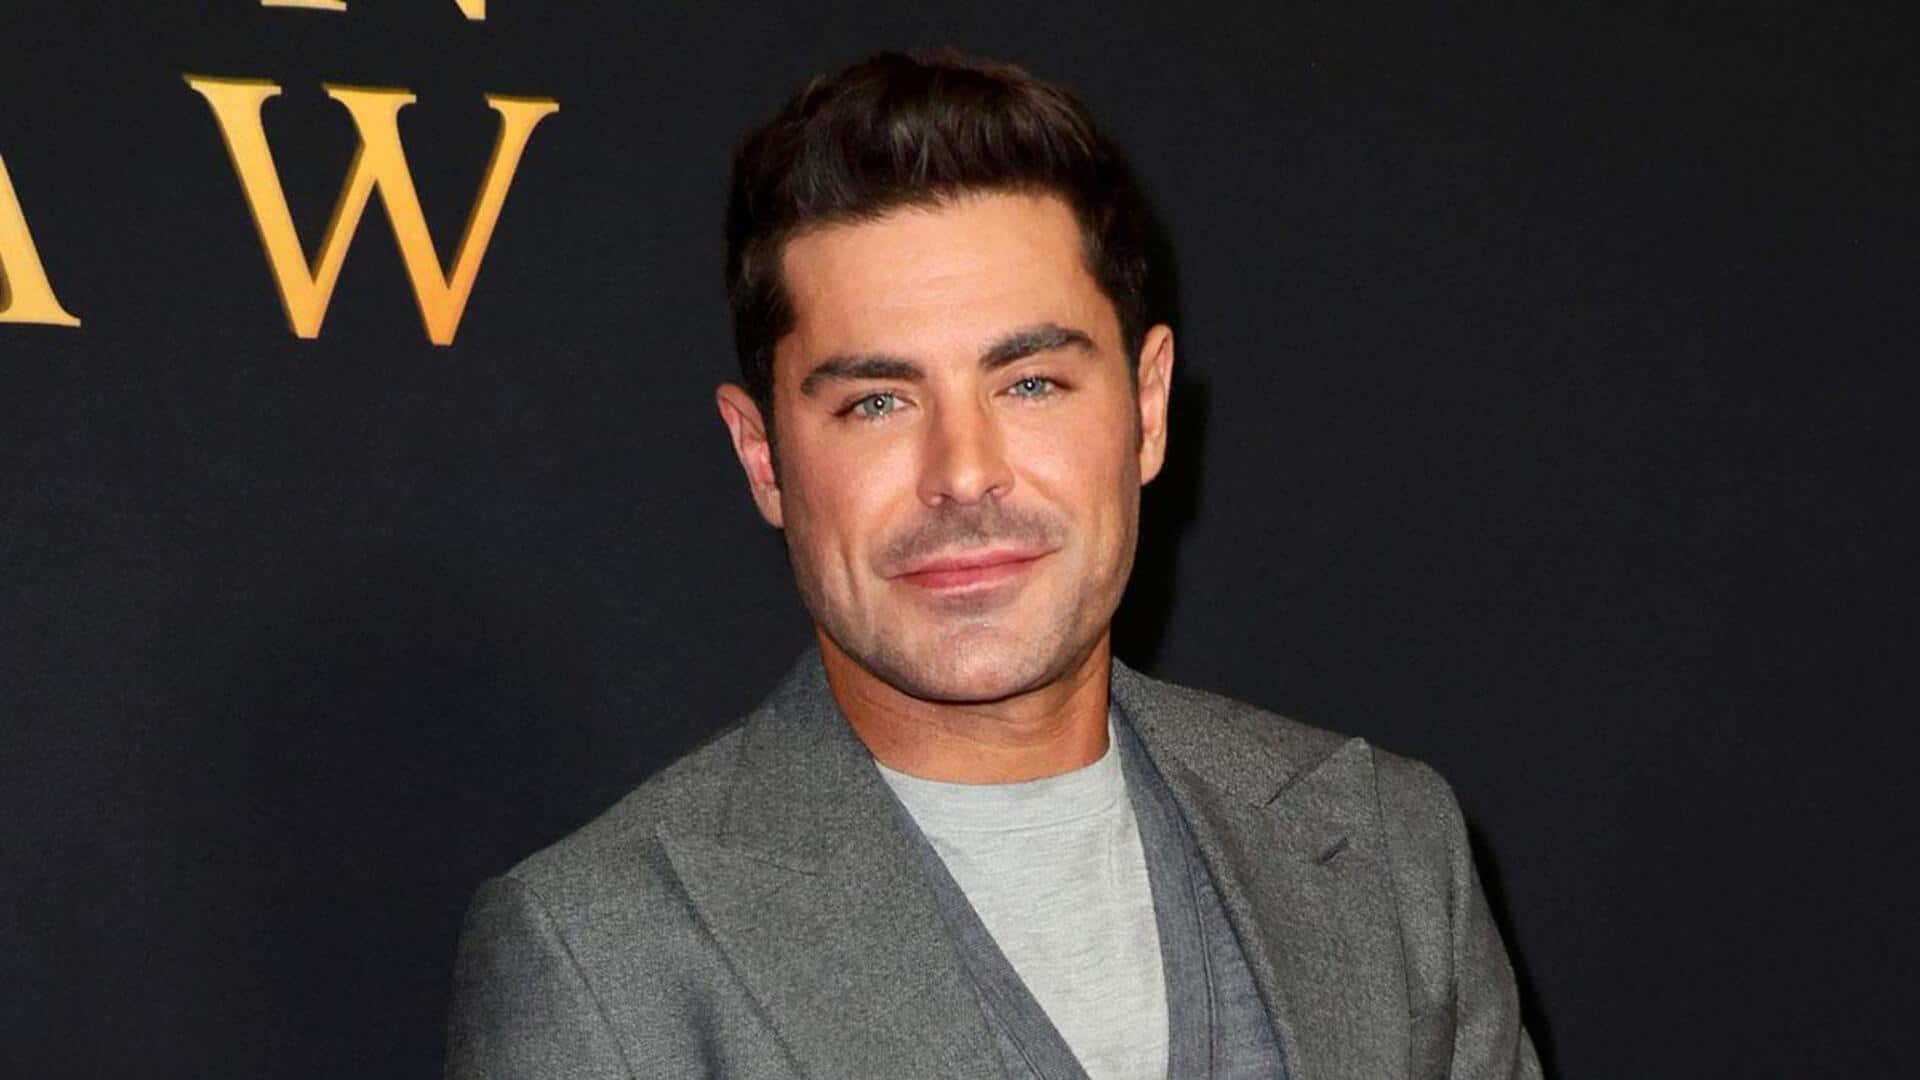 Zac Efron shot an entire 'fake' interview for 'Family Affair'